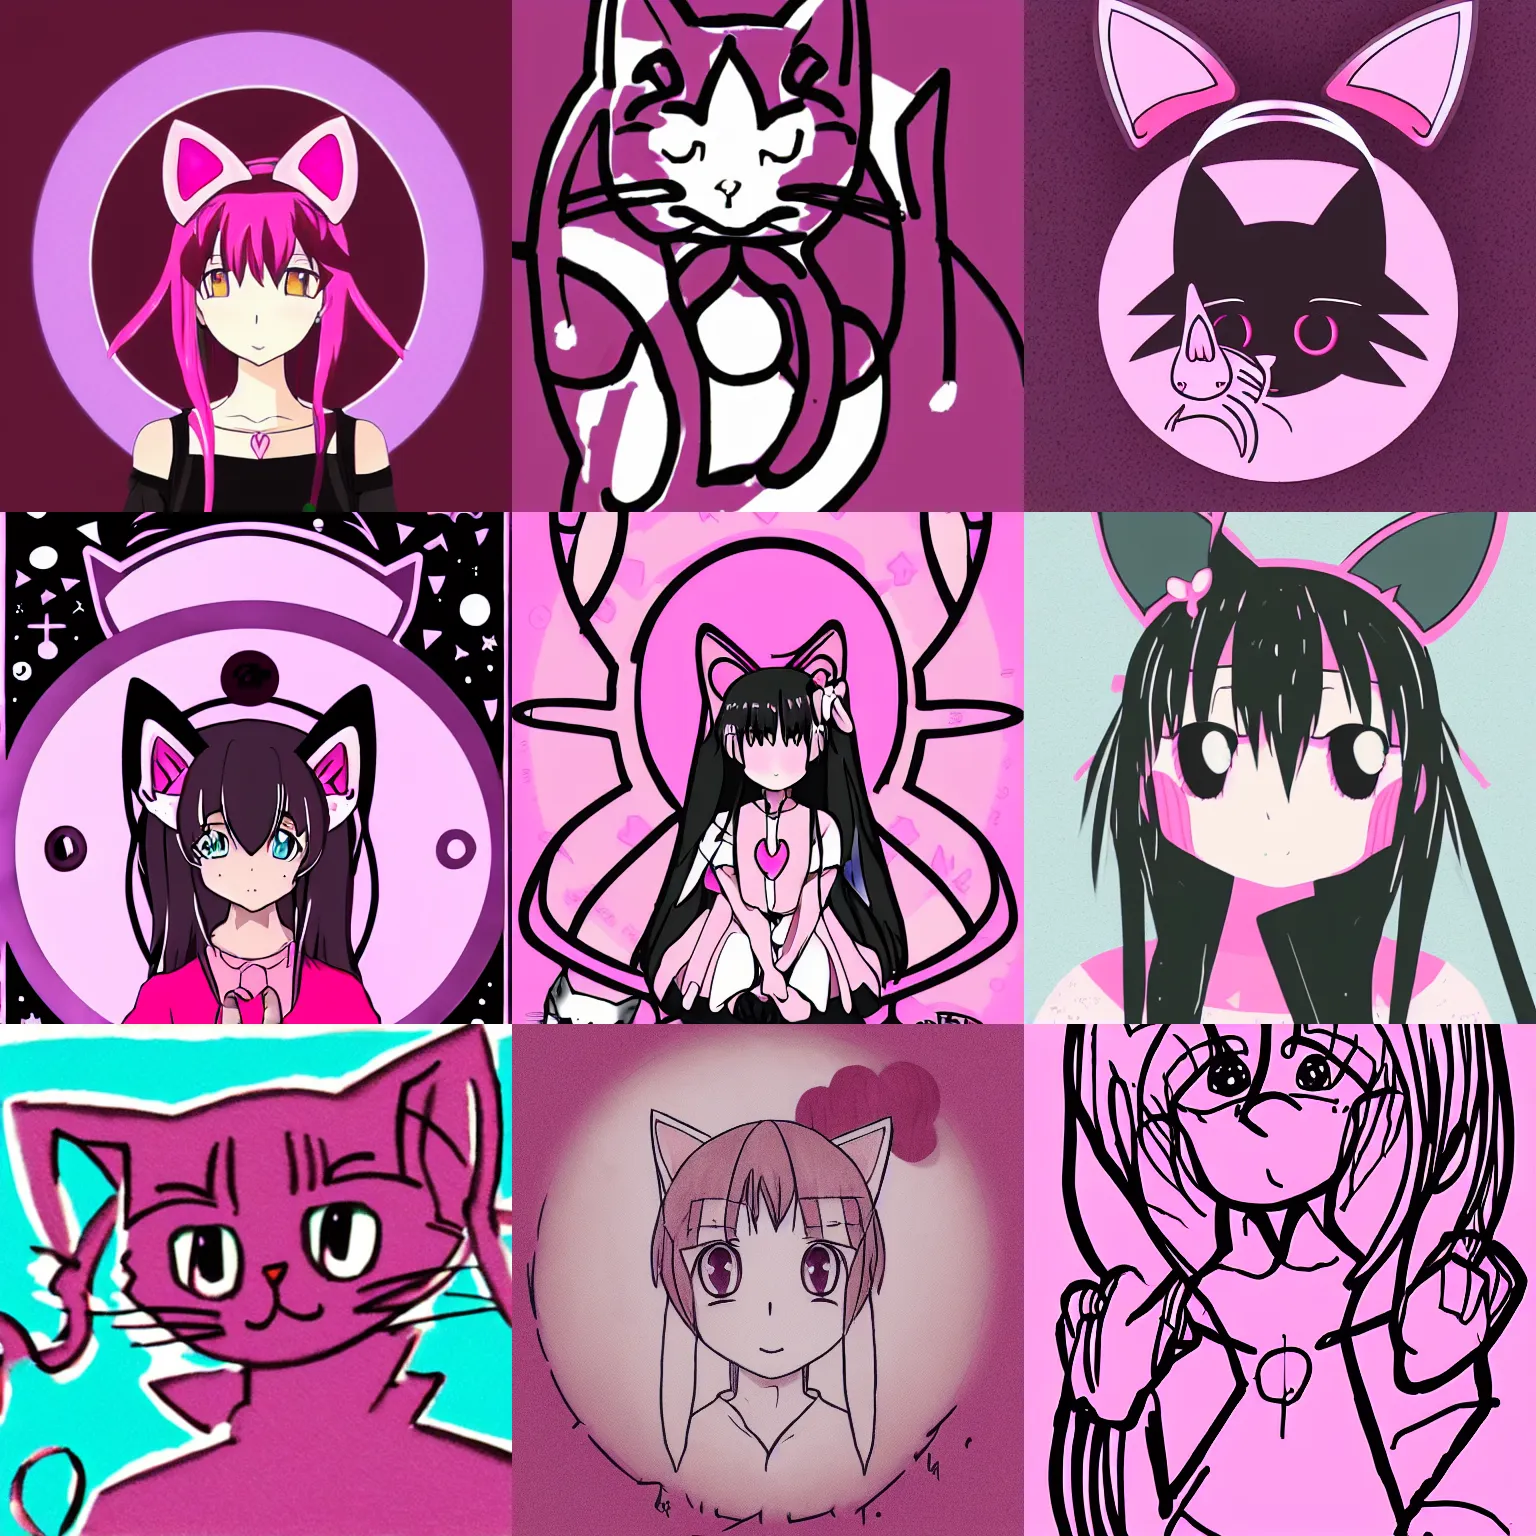 Prompt: profile of an anime (cat) girl with cat ears drawing magic circles. Pink hue.